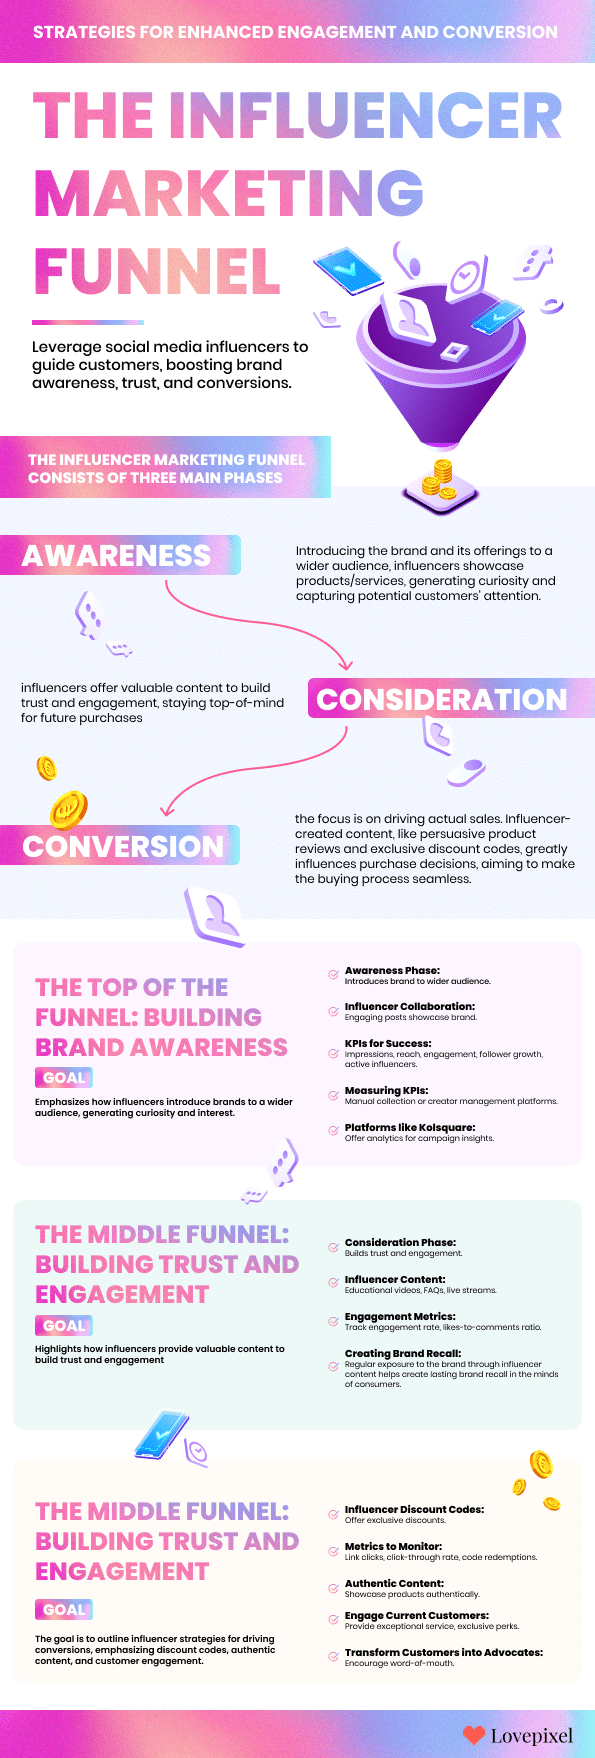 Influencer Marketing Funnel Infographic